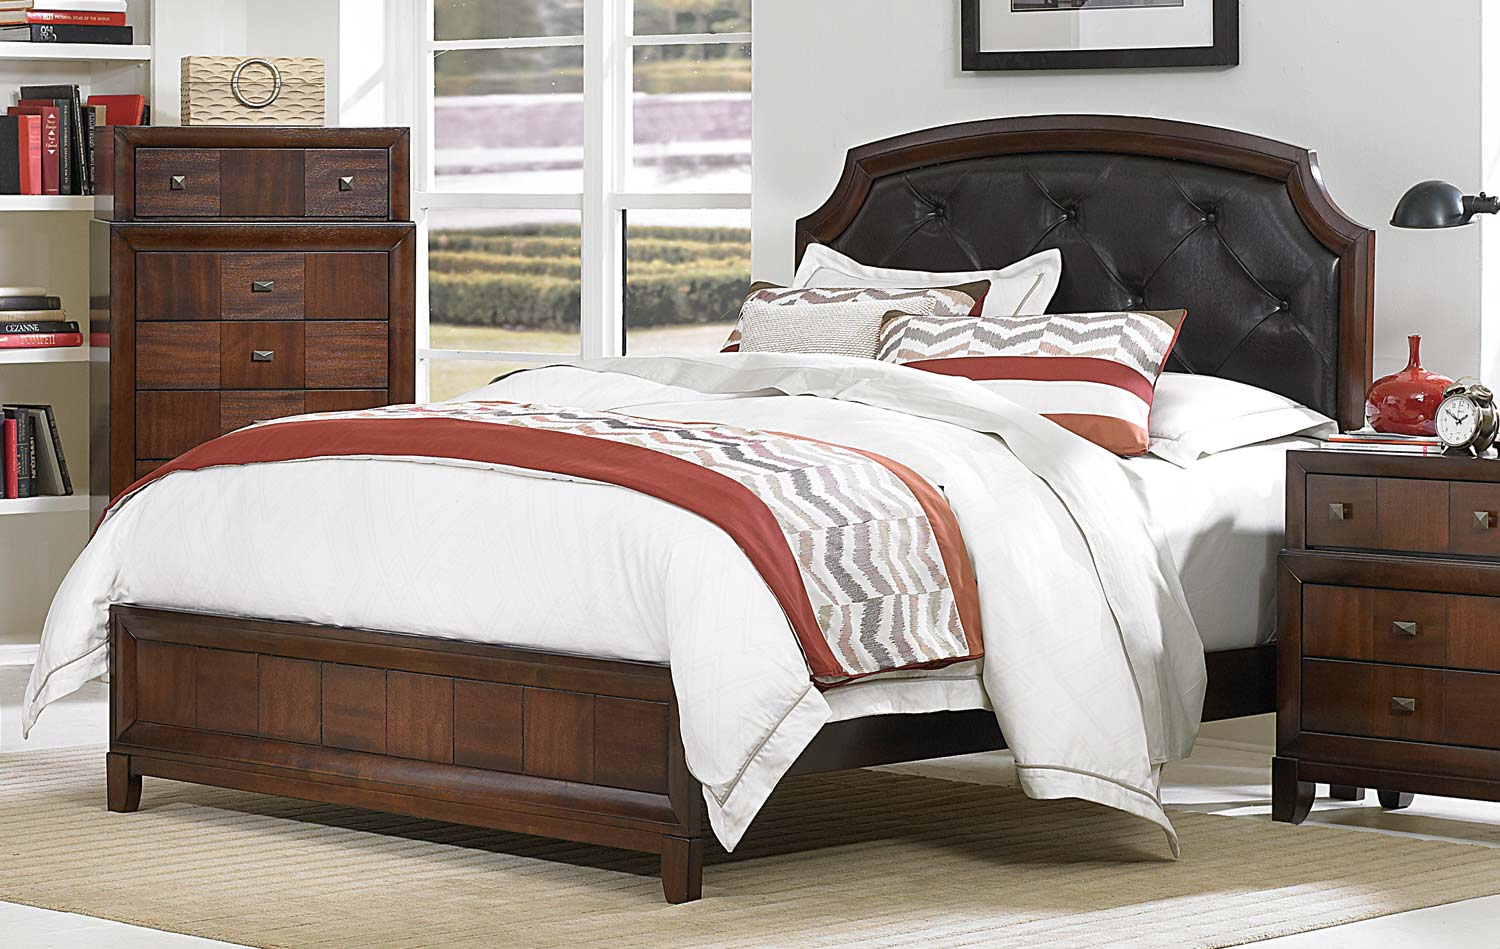 Homelegance Carrie Ann Upholstered Bed - Parquet Cherry